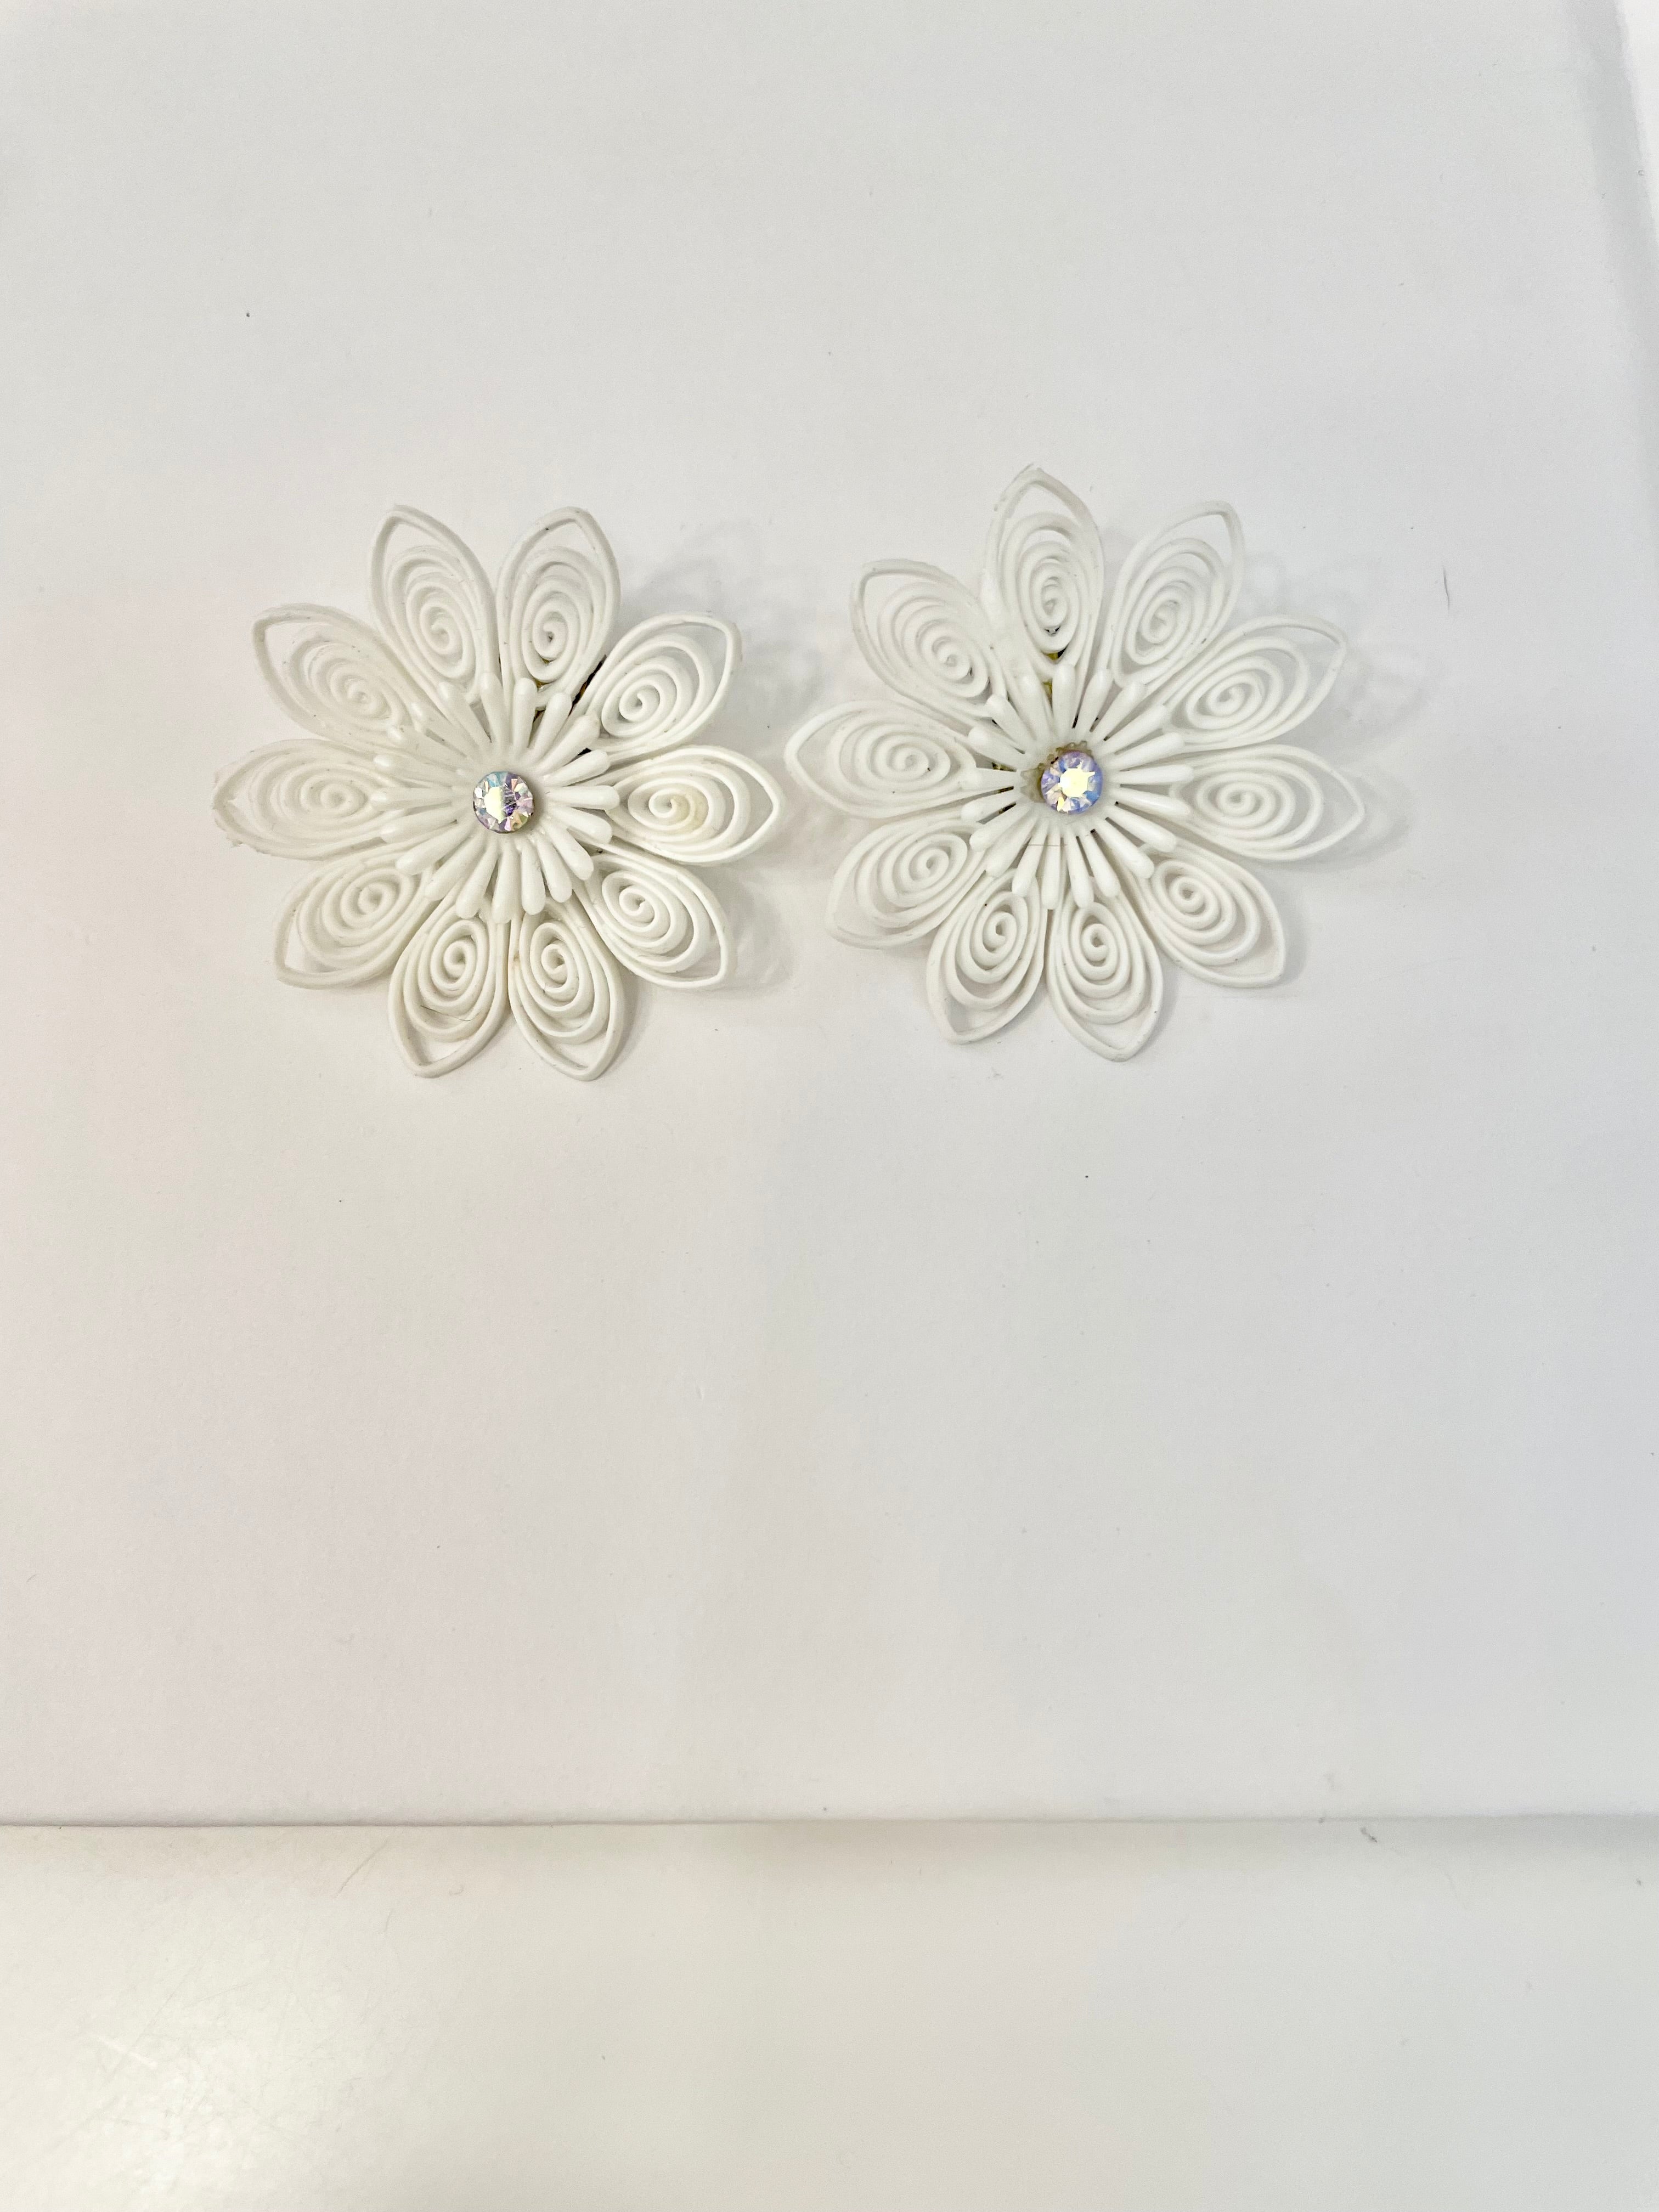 She just loves flowers... these blanc filigree resin flowers are truly divine!